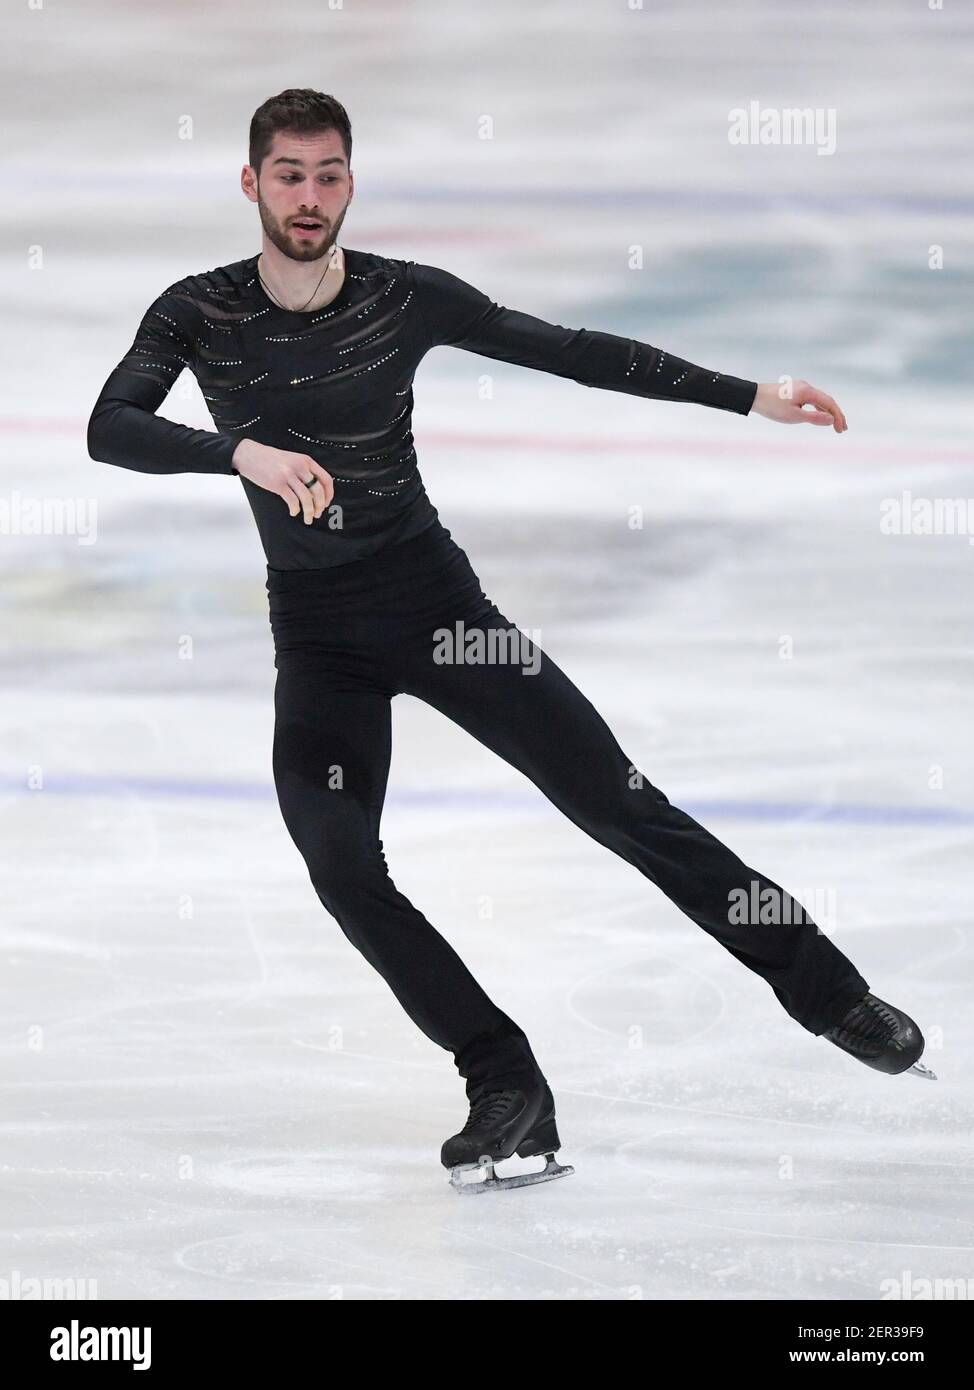 THE HAGUE, NETHERLANDS - FEBRUARY 28: Mate Borocz of Hungary competes in the figure skating men's free skate program on Day 4 during the Challenge Cup Stock Photo